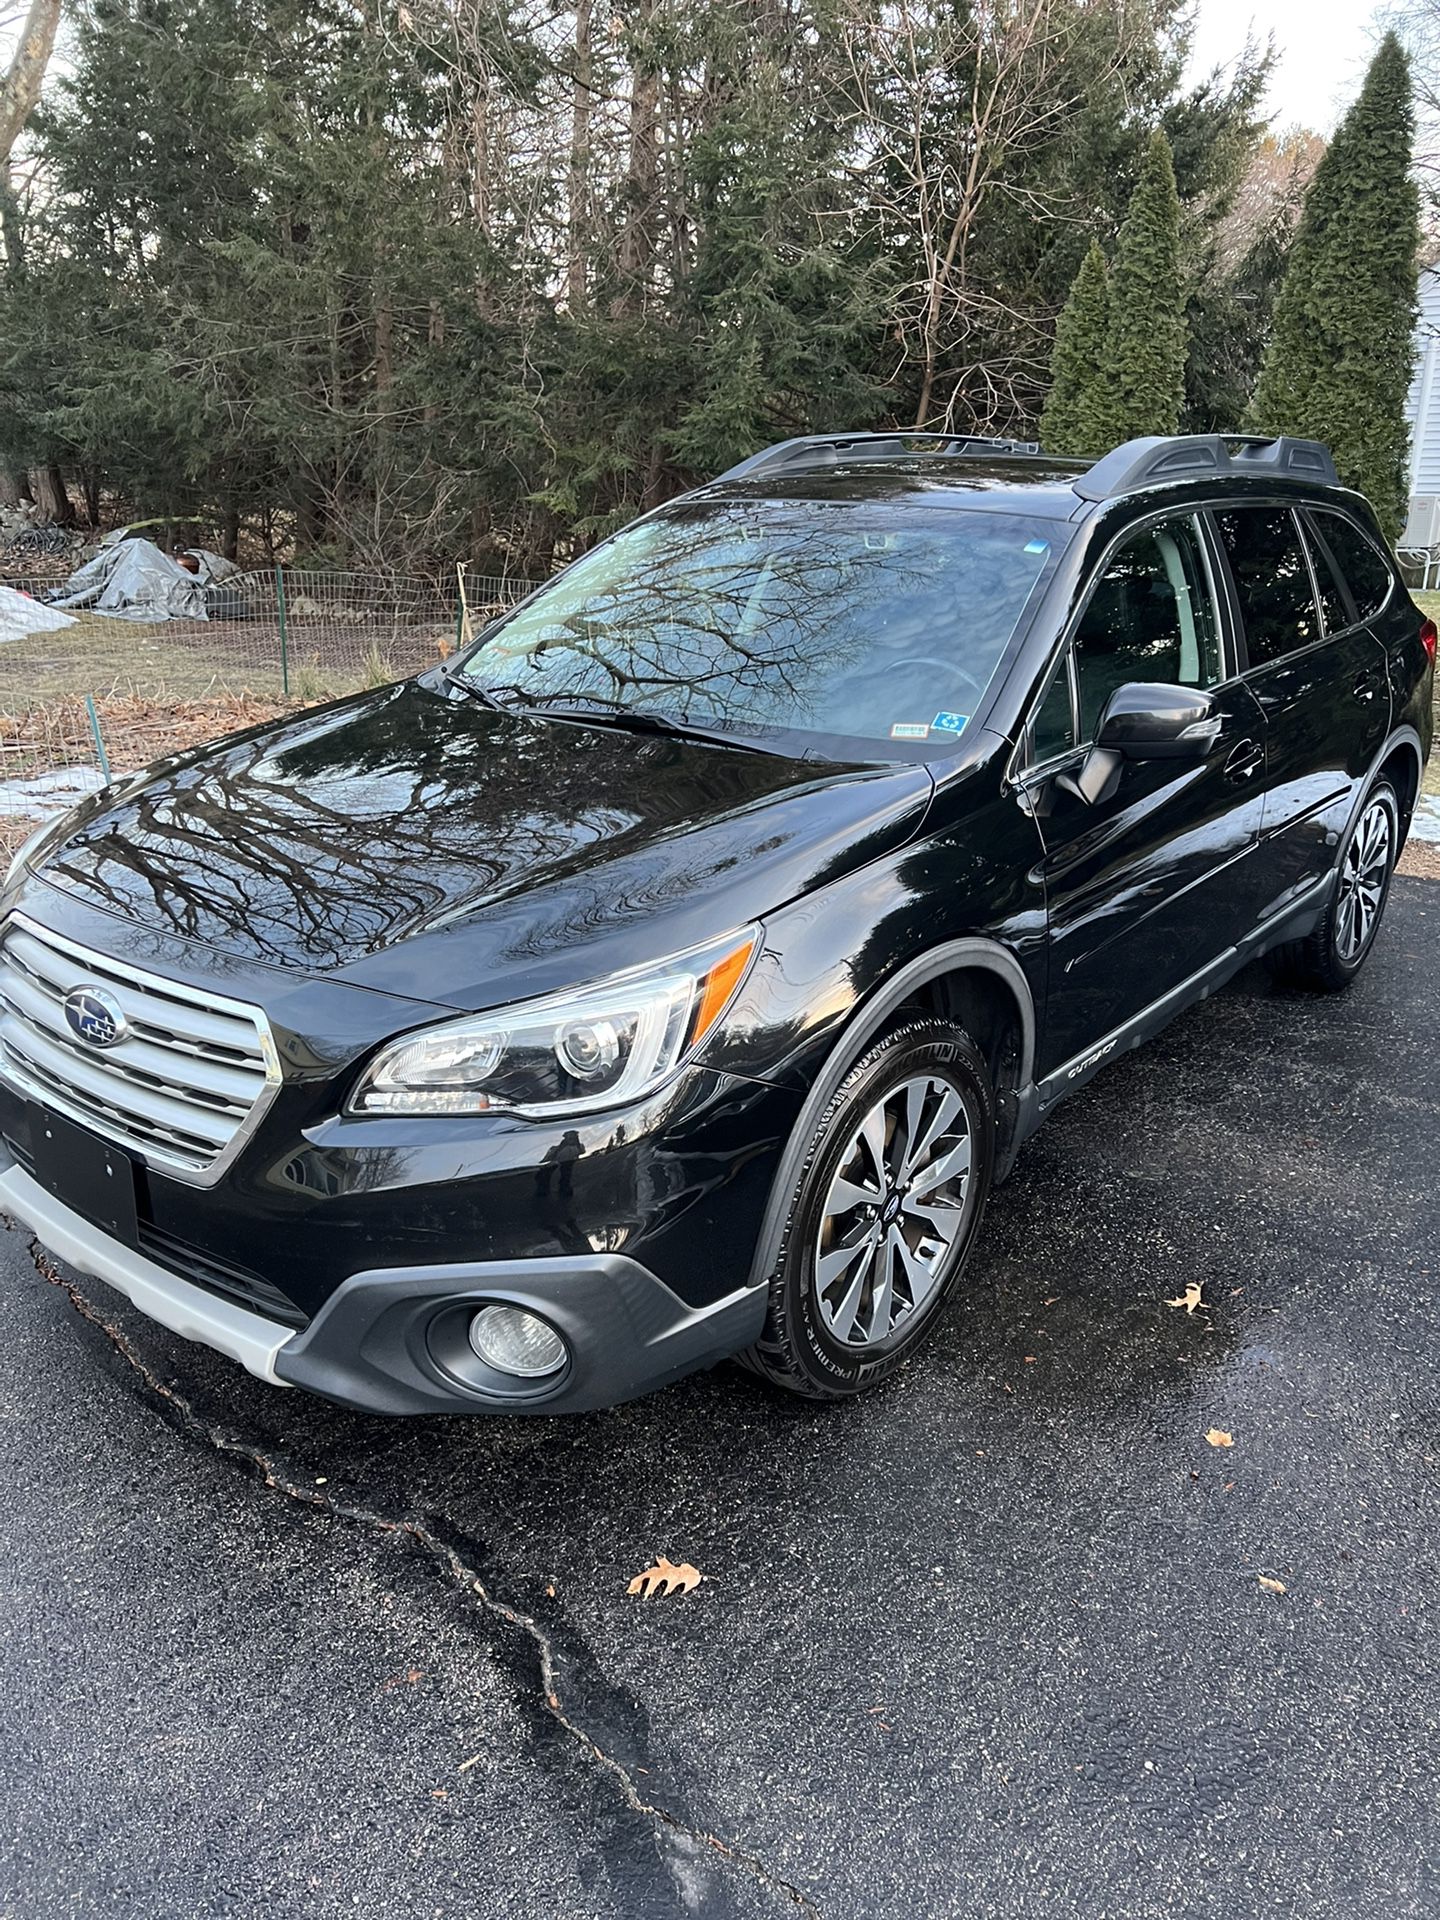 2015 Subaru Outback for Sale in Franklin, MA OfferUp